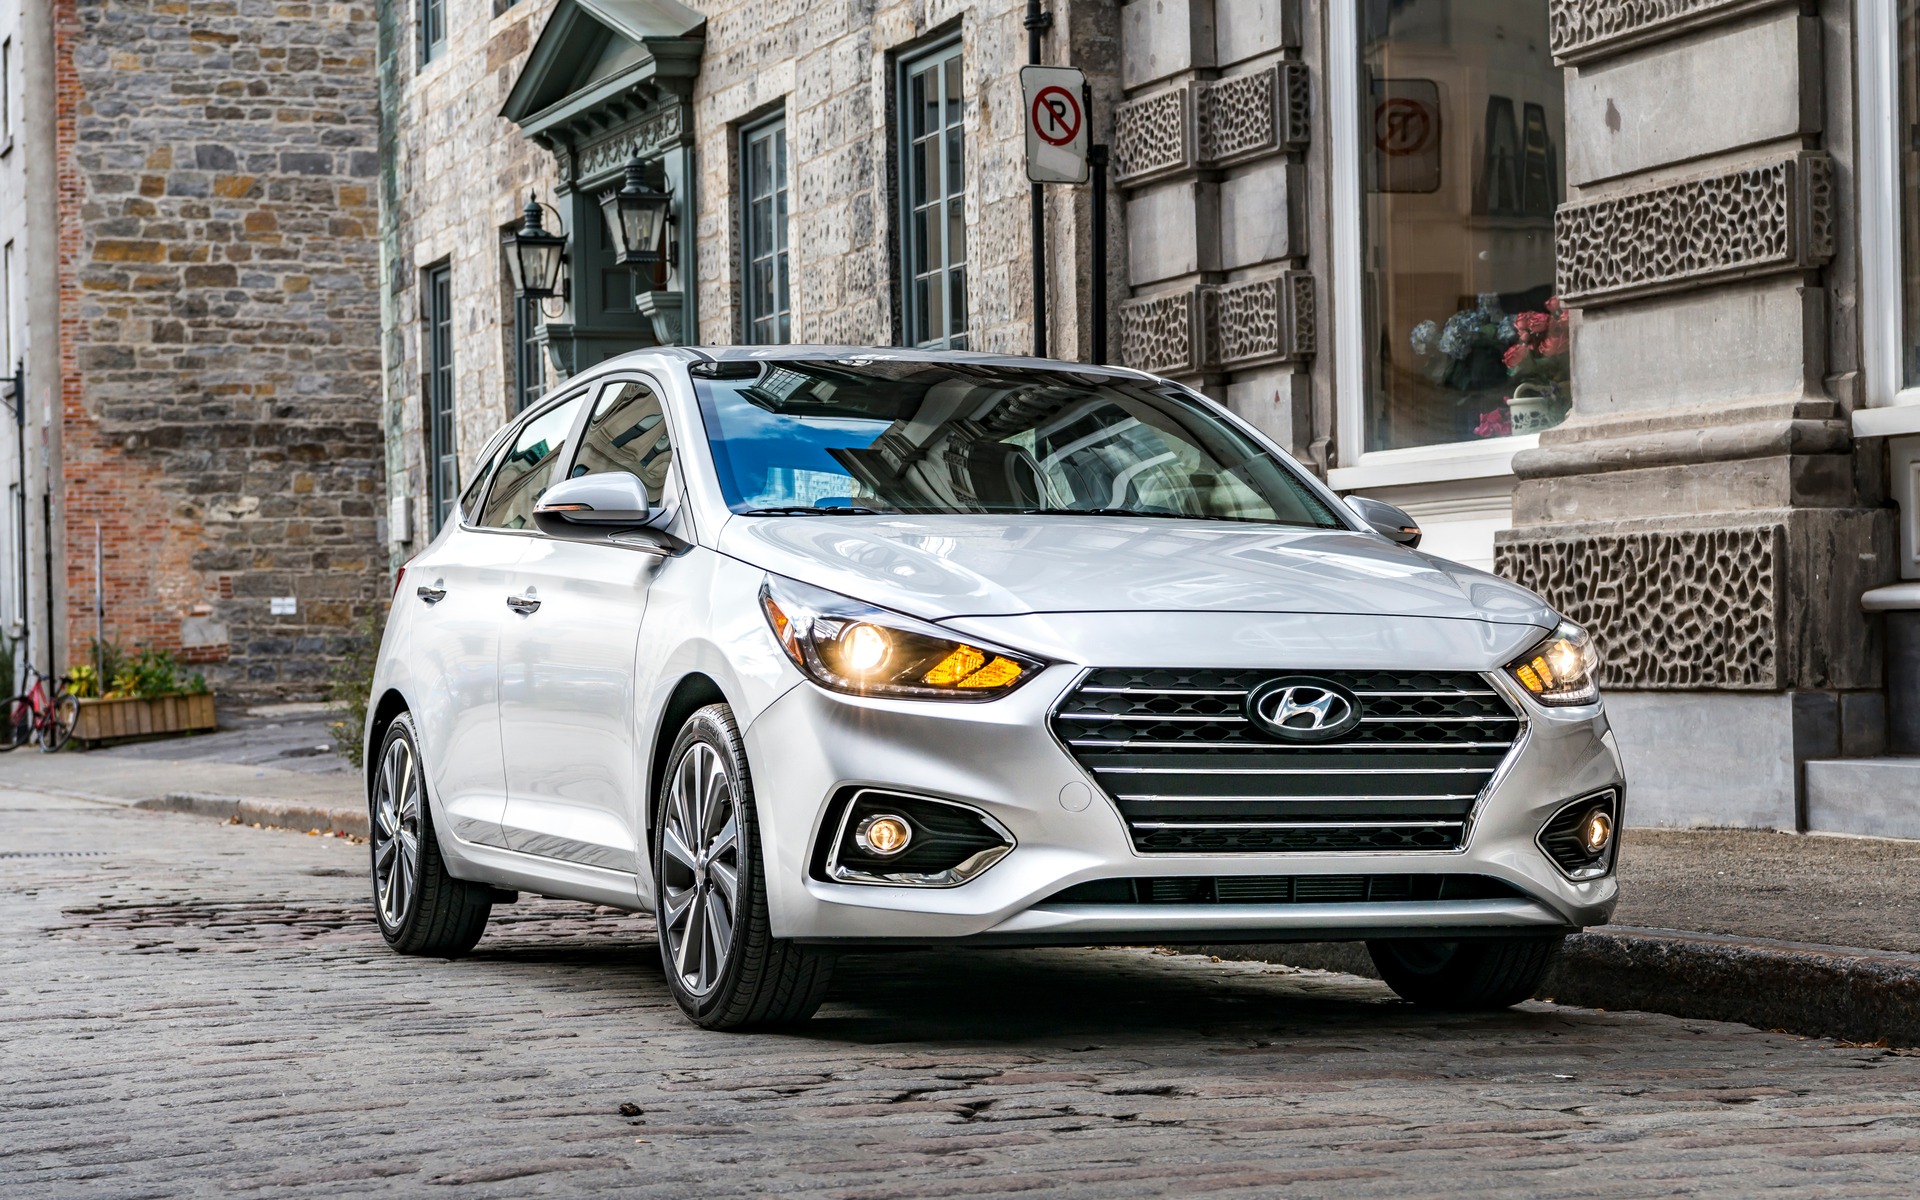 2018 Hyundai Accent Pricing Announced - The Car Guide